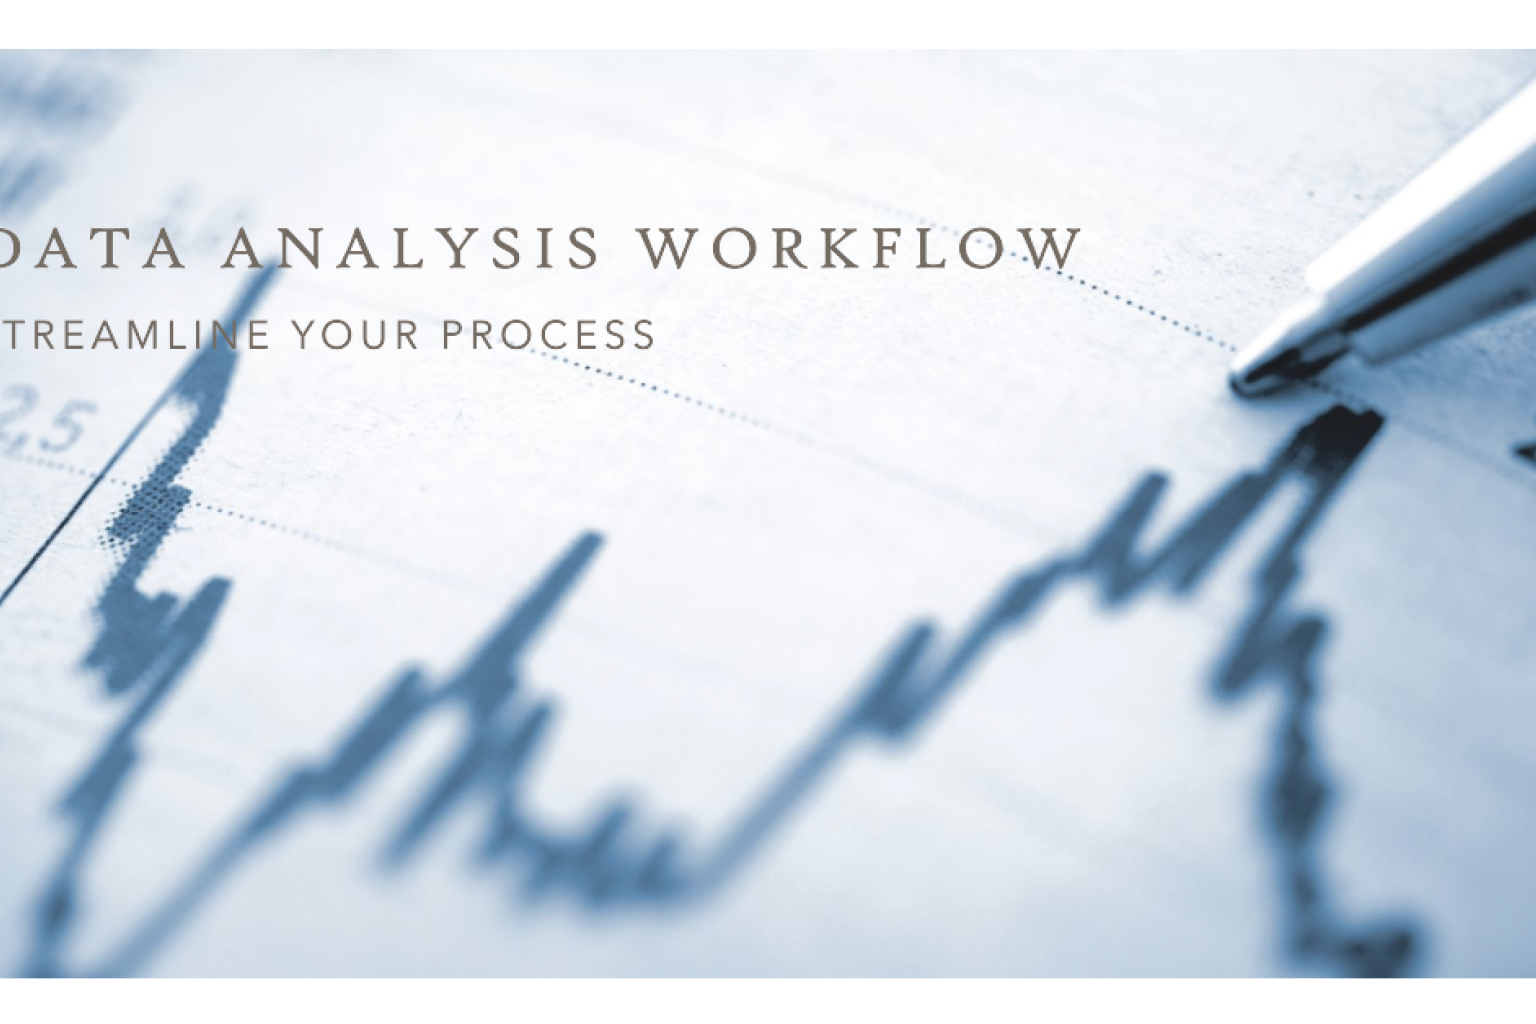 Master the data analysis workflow with our comprehensive guide. Learn the steps, tools, and best practices to identify insights and solve complex problems.